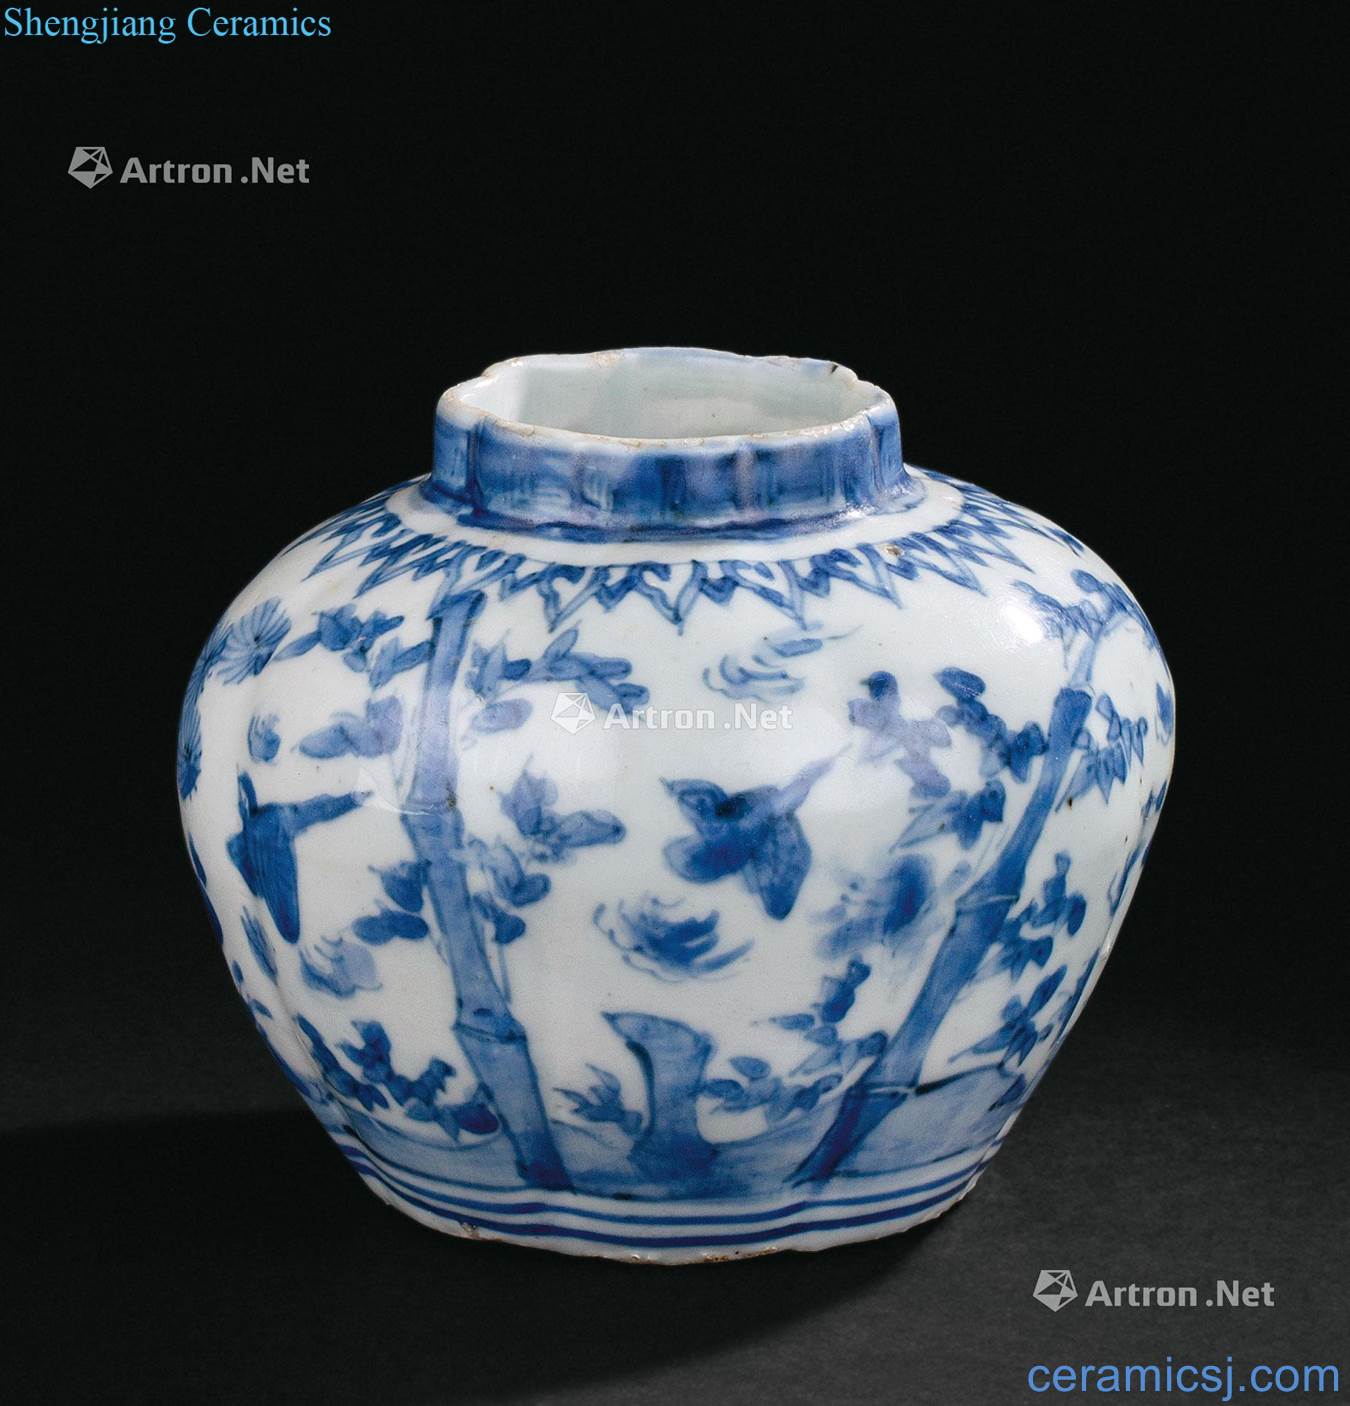 In the Ming dynasty (1368-1644) blue and white, poetic lines melon leng cans